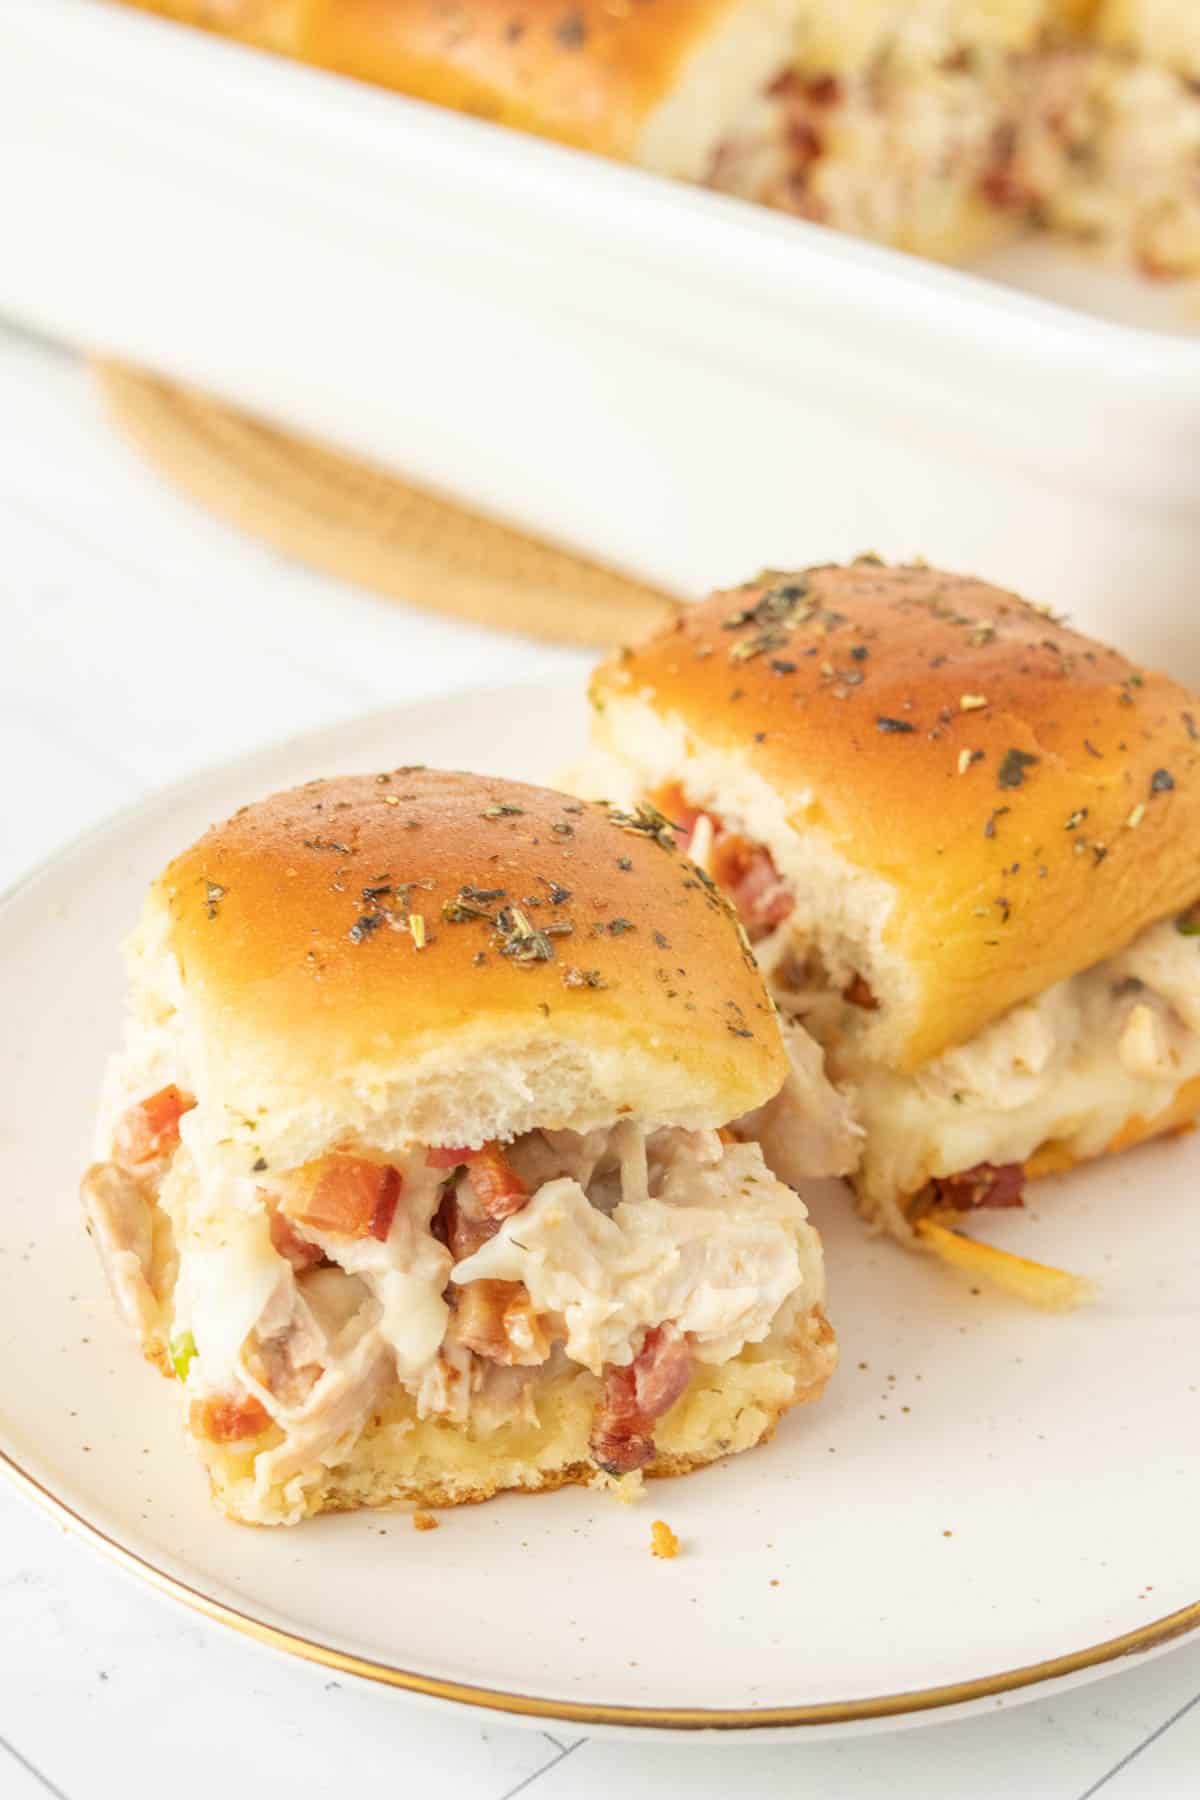 Chicken sliders on a white plate.